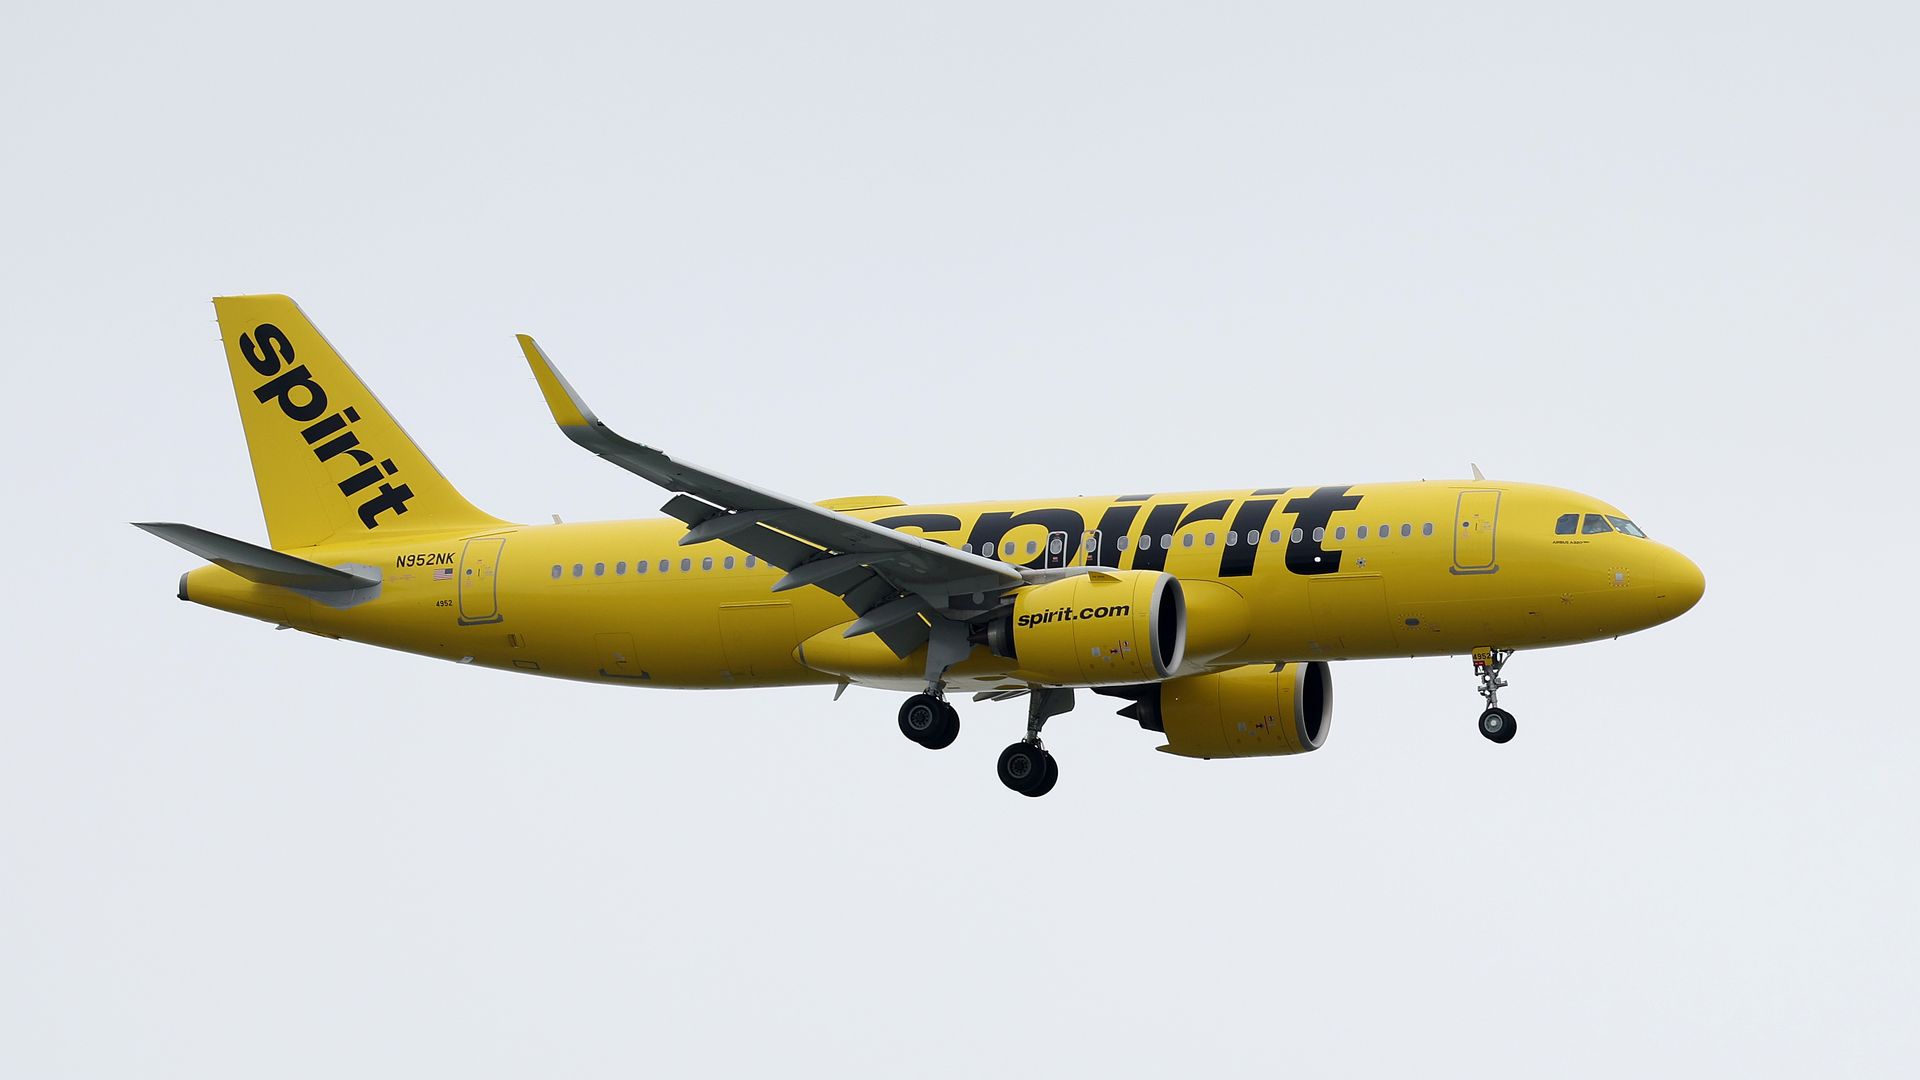 A Spirit Airlines plane lands at Oakland International Airport on July 28, 2022 in Oakland, California